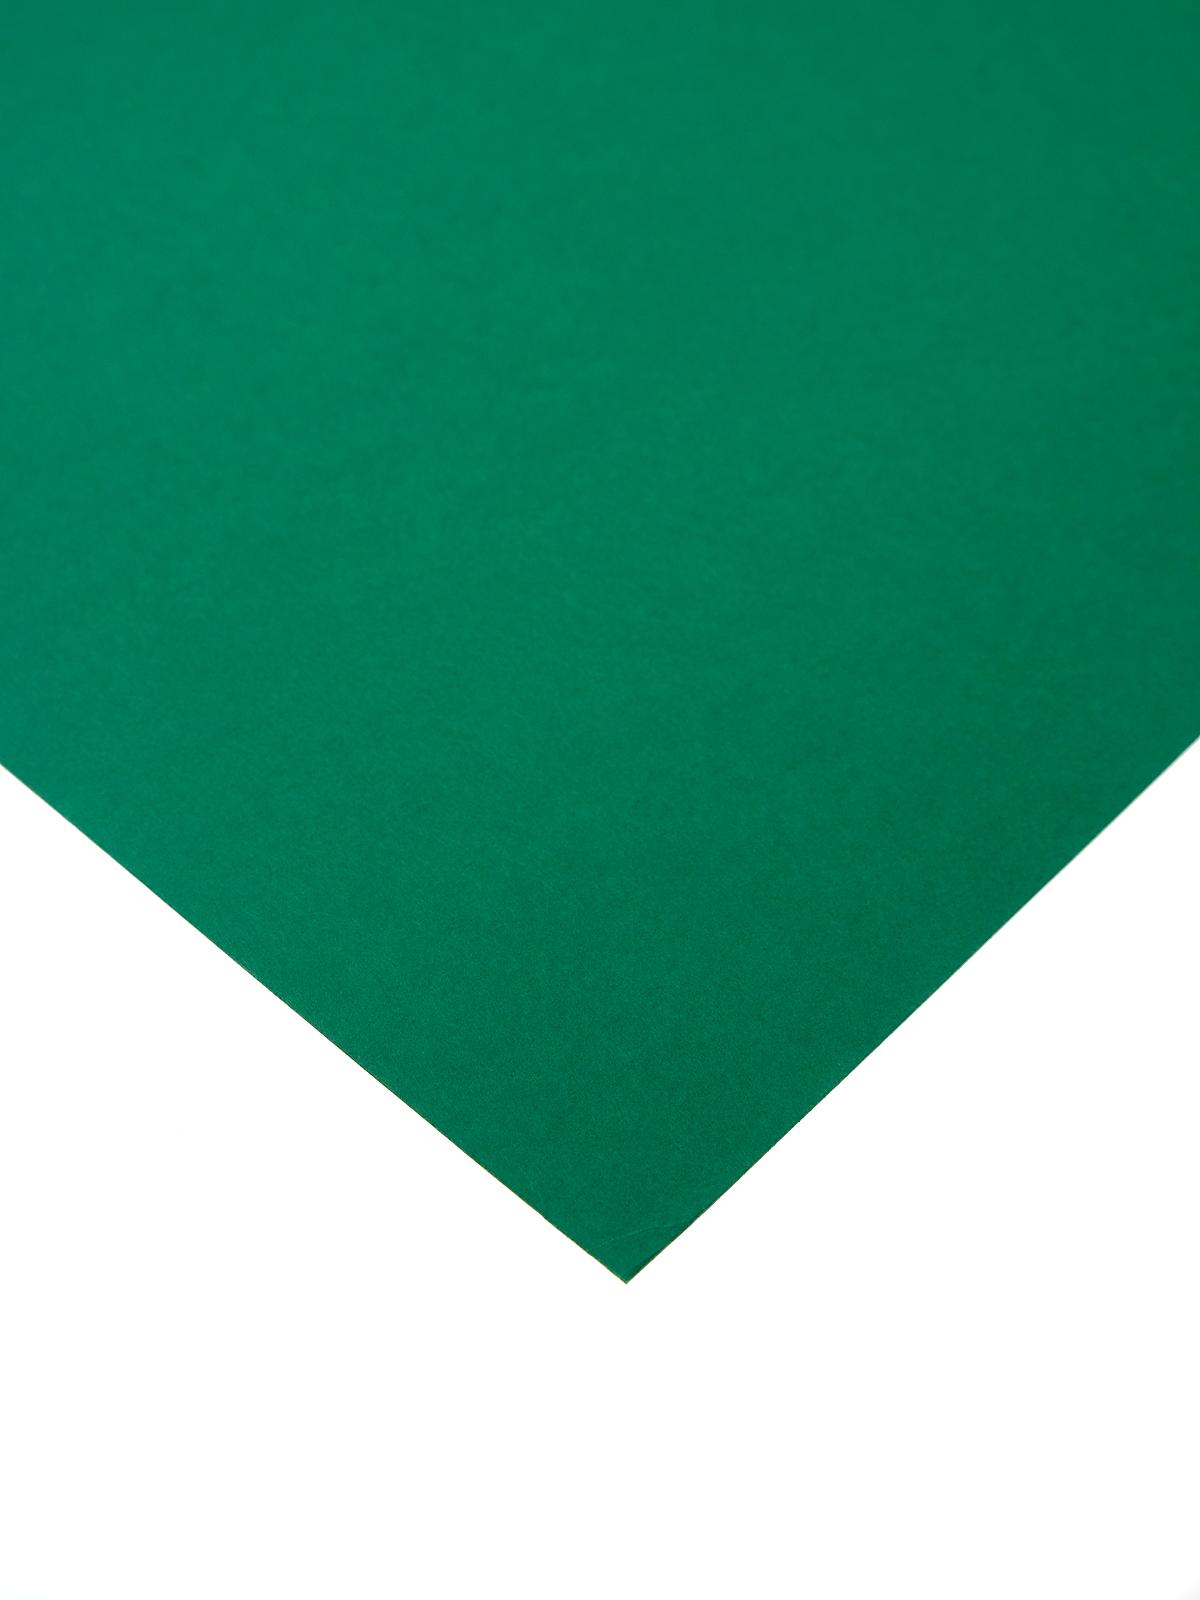 Colorline Heavyweight Paper Sheets Moss Green 300 Gsm 19 In. X 25 In.